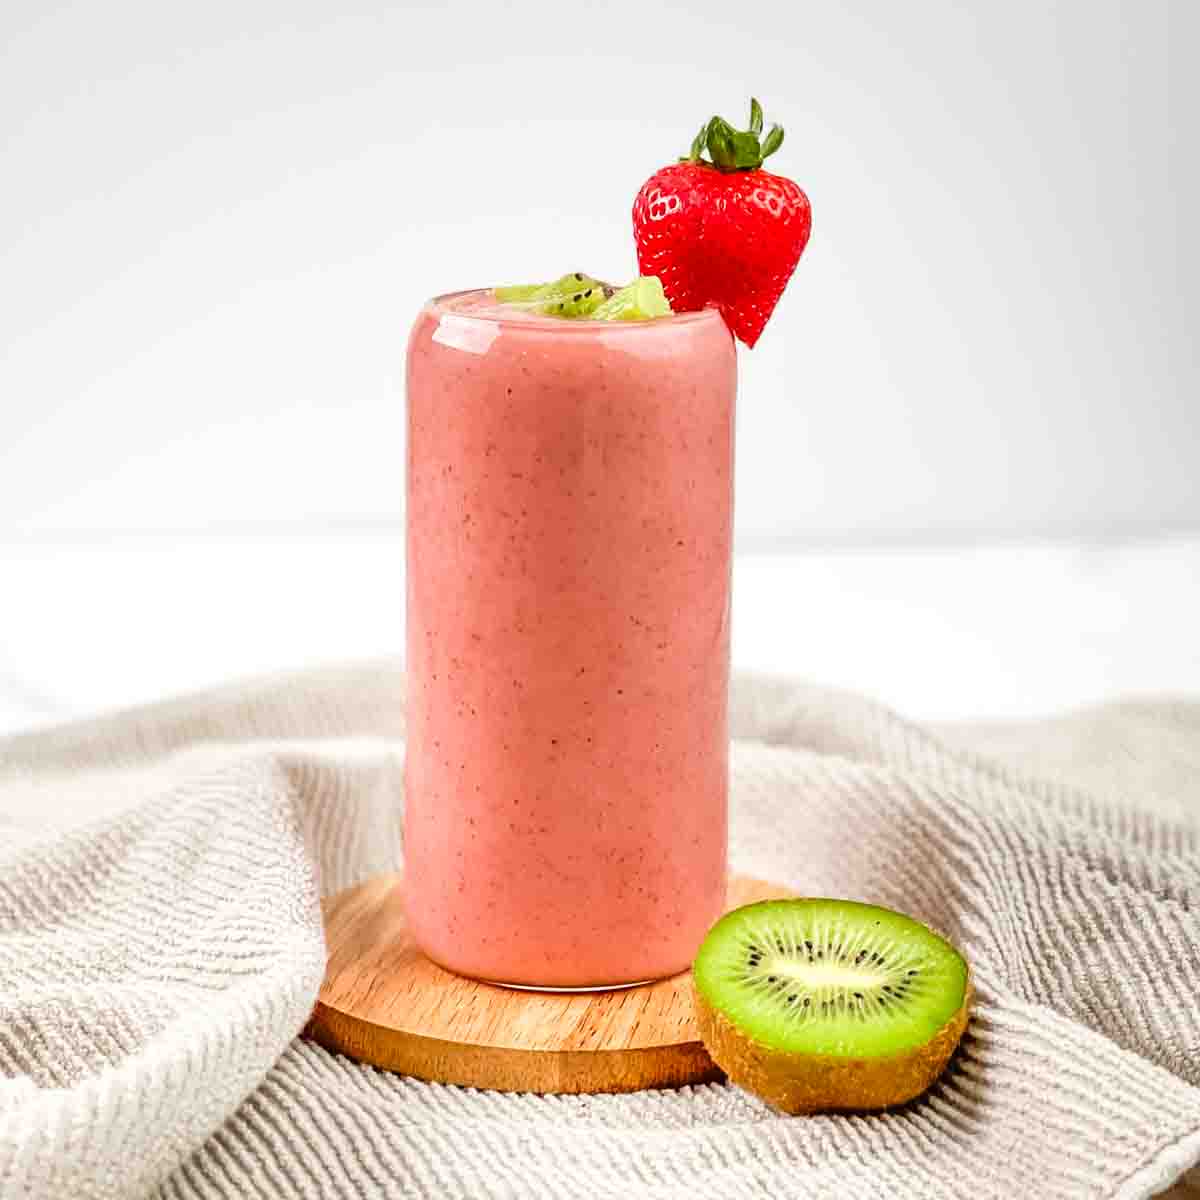 A tall glass filled with kiwi tropical smoothie, garnished with a fresh kiwi and strawberry.